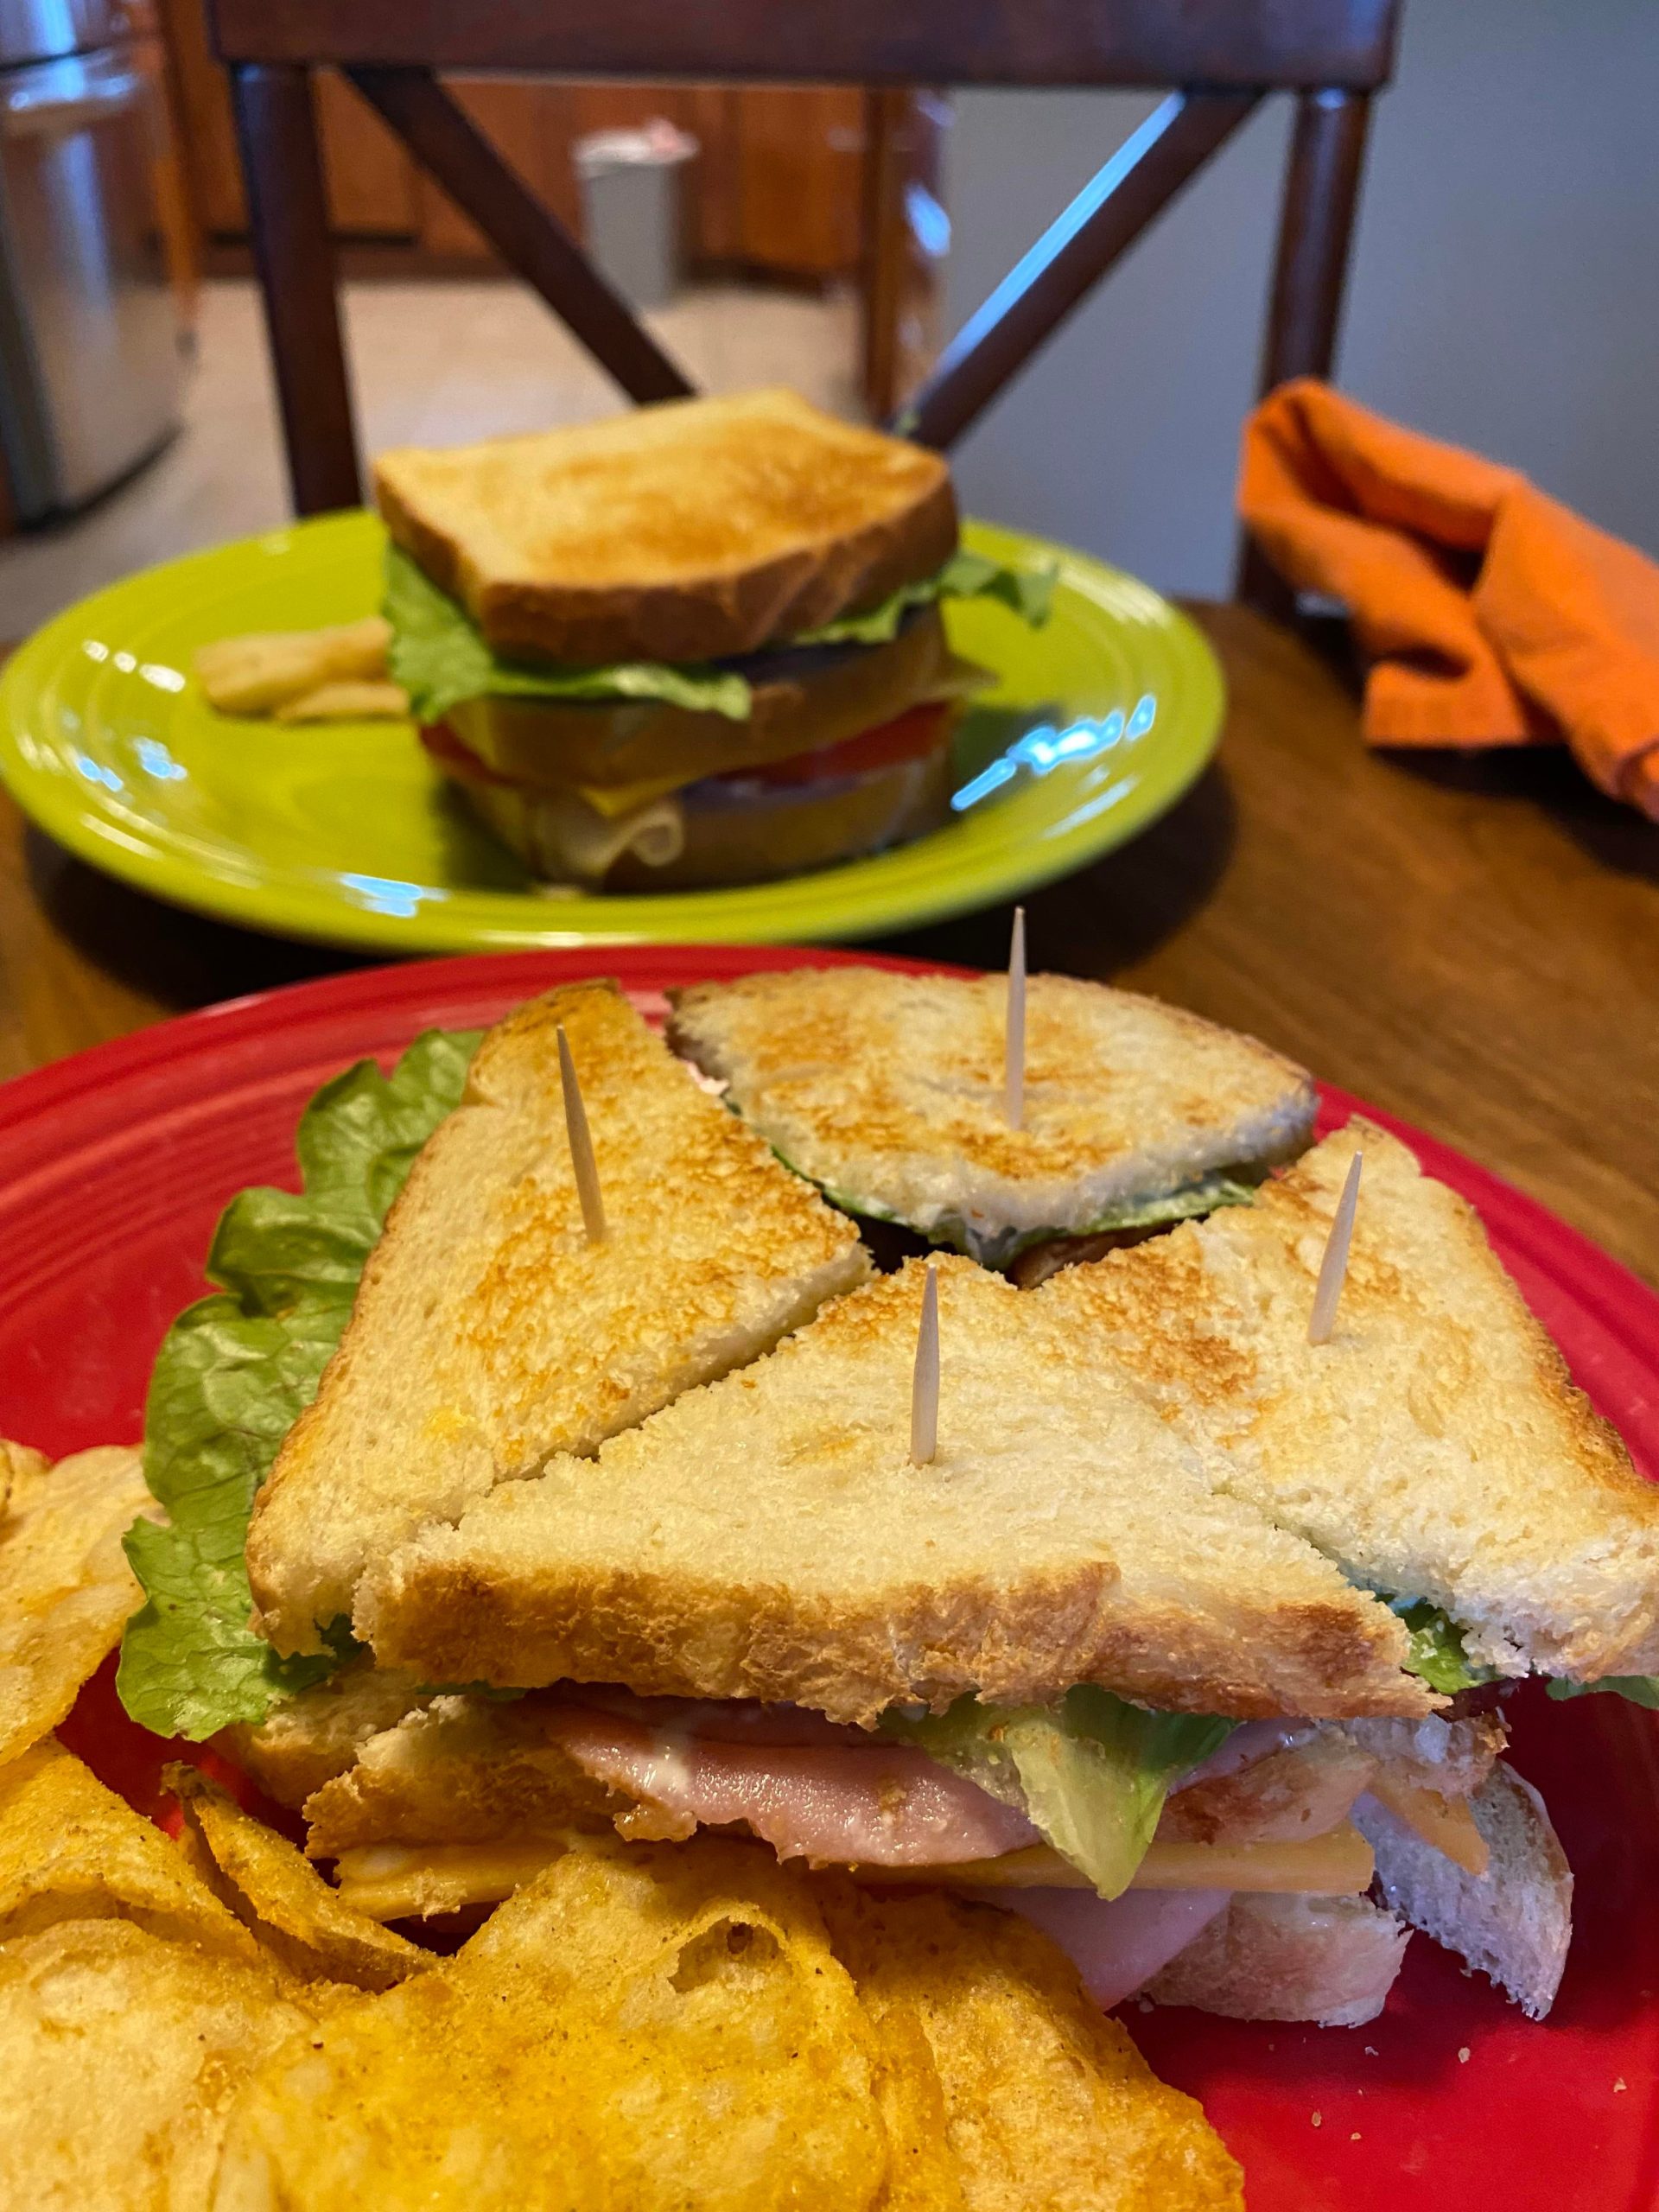 My wife made some killer Club Sandwiches. - Dining and Cooking